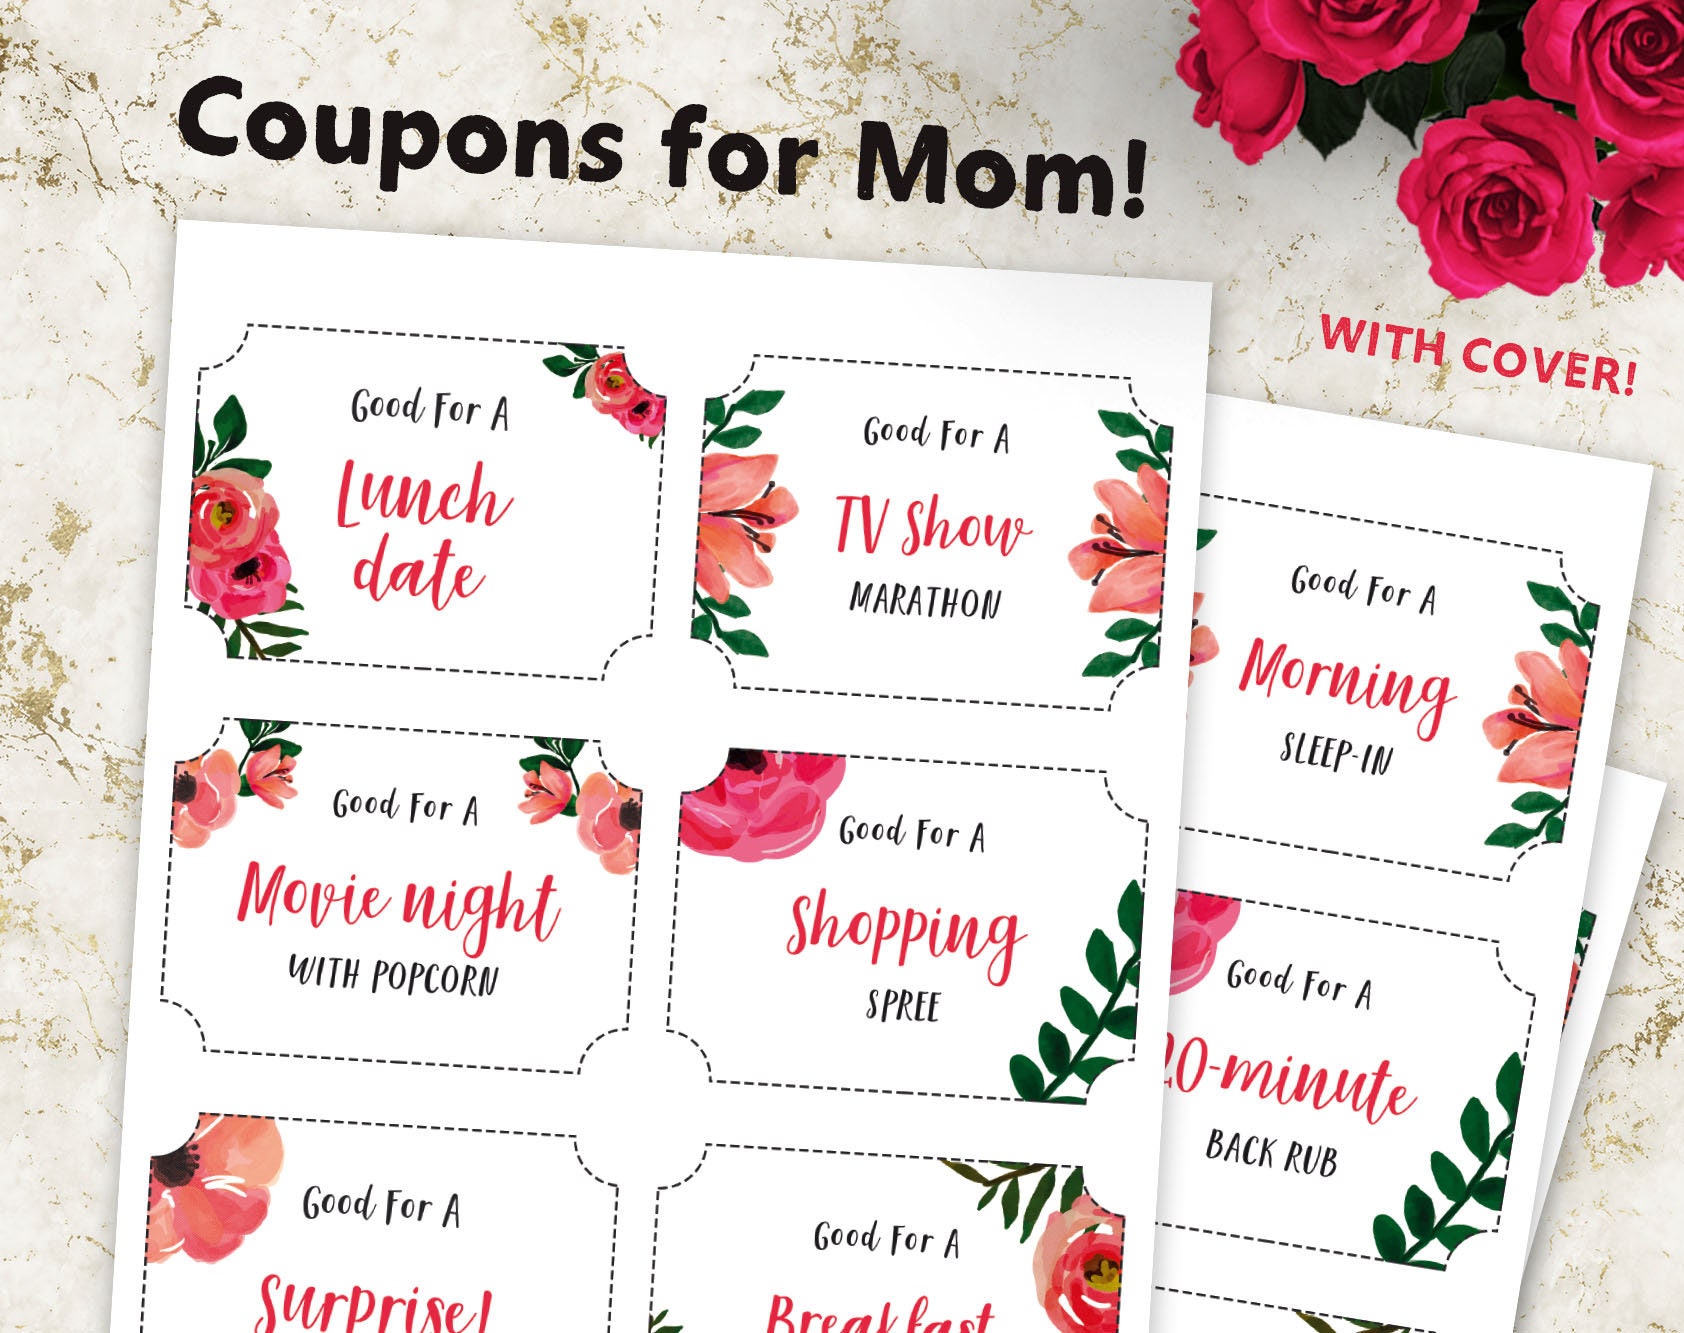 Coupon Book For Mom Birthday Ideas